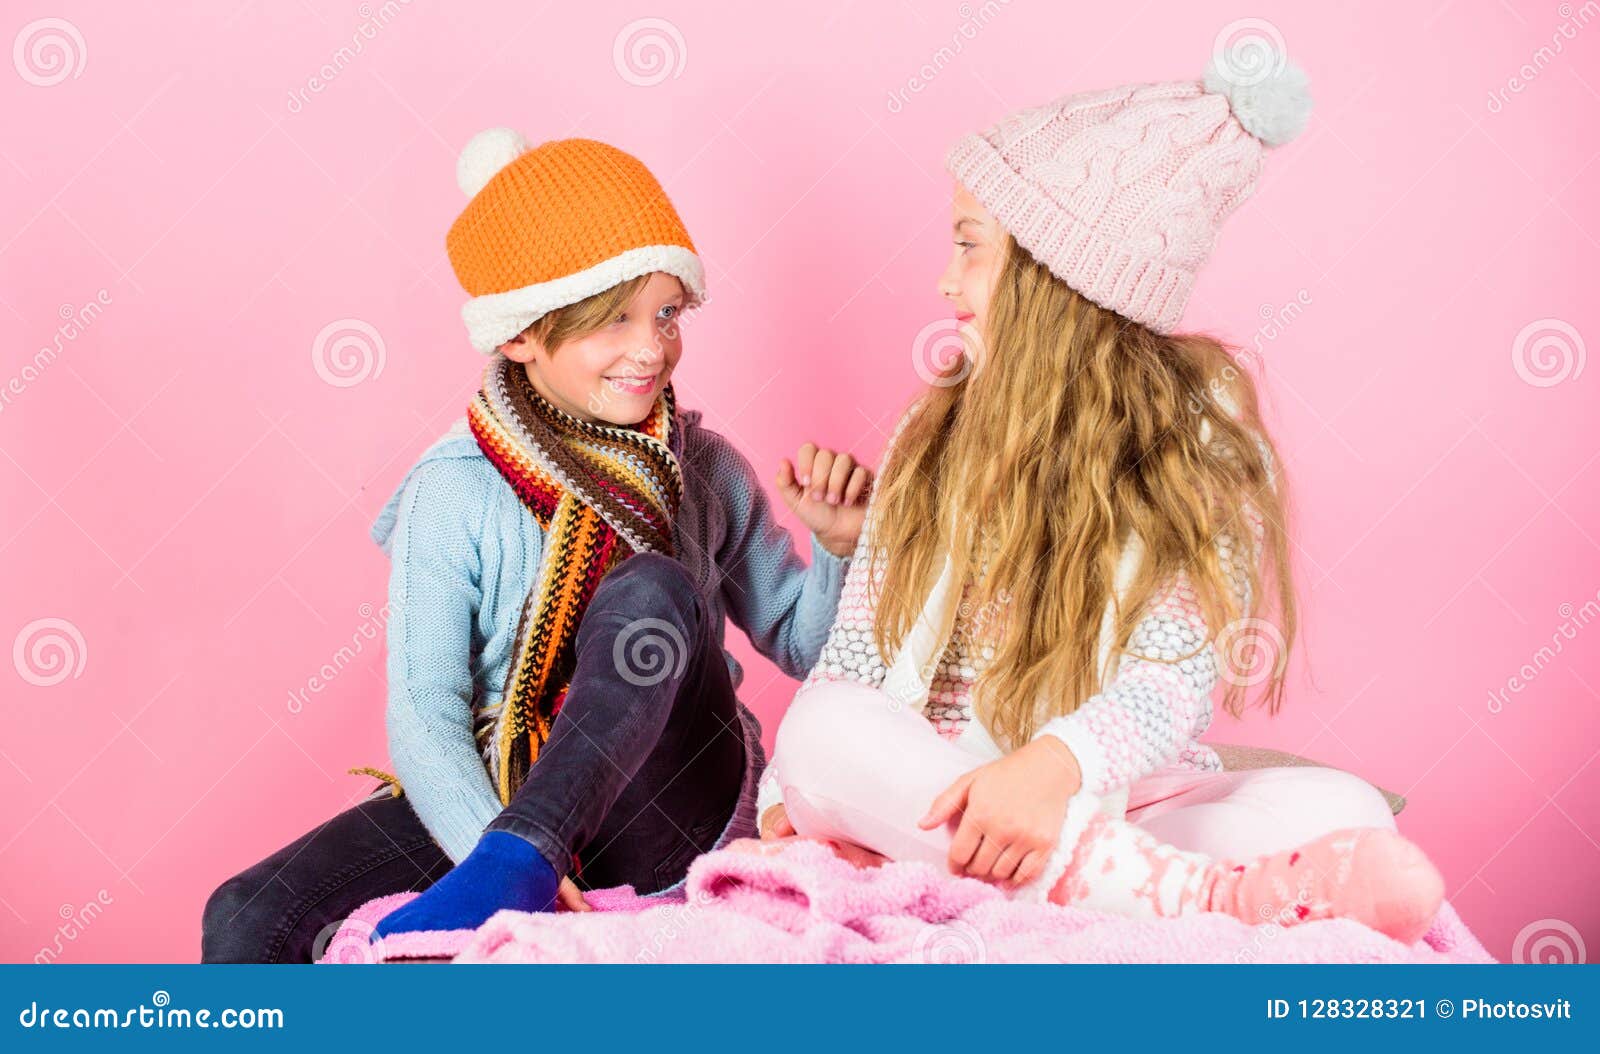 29,338 Winter Fashion Accessories Stock Photos - Free & Royalty-Free Stock  Photos from Dreamstime